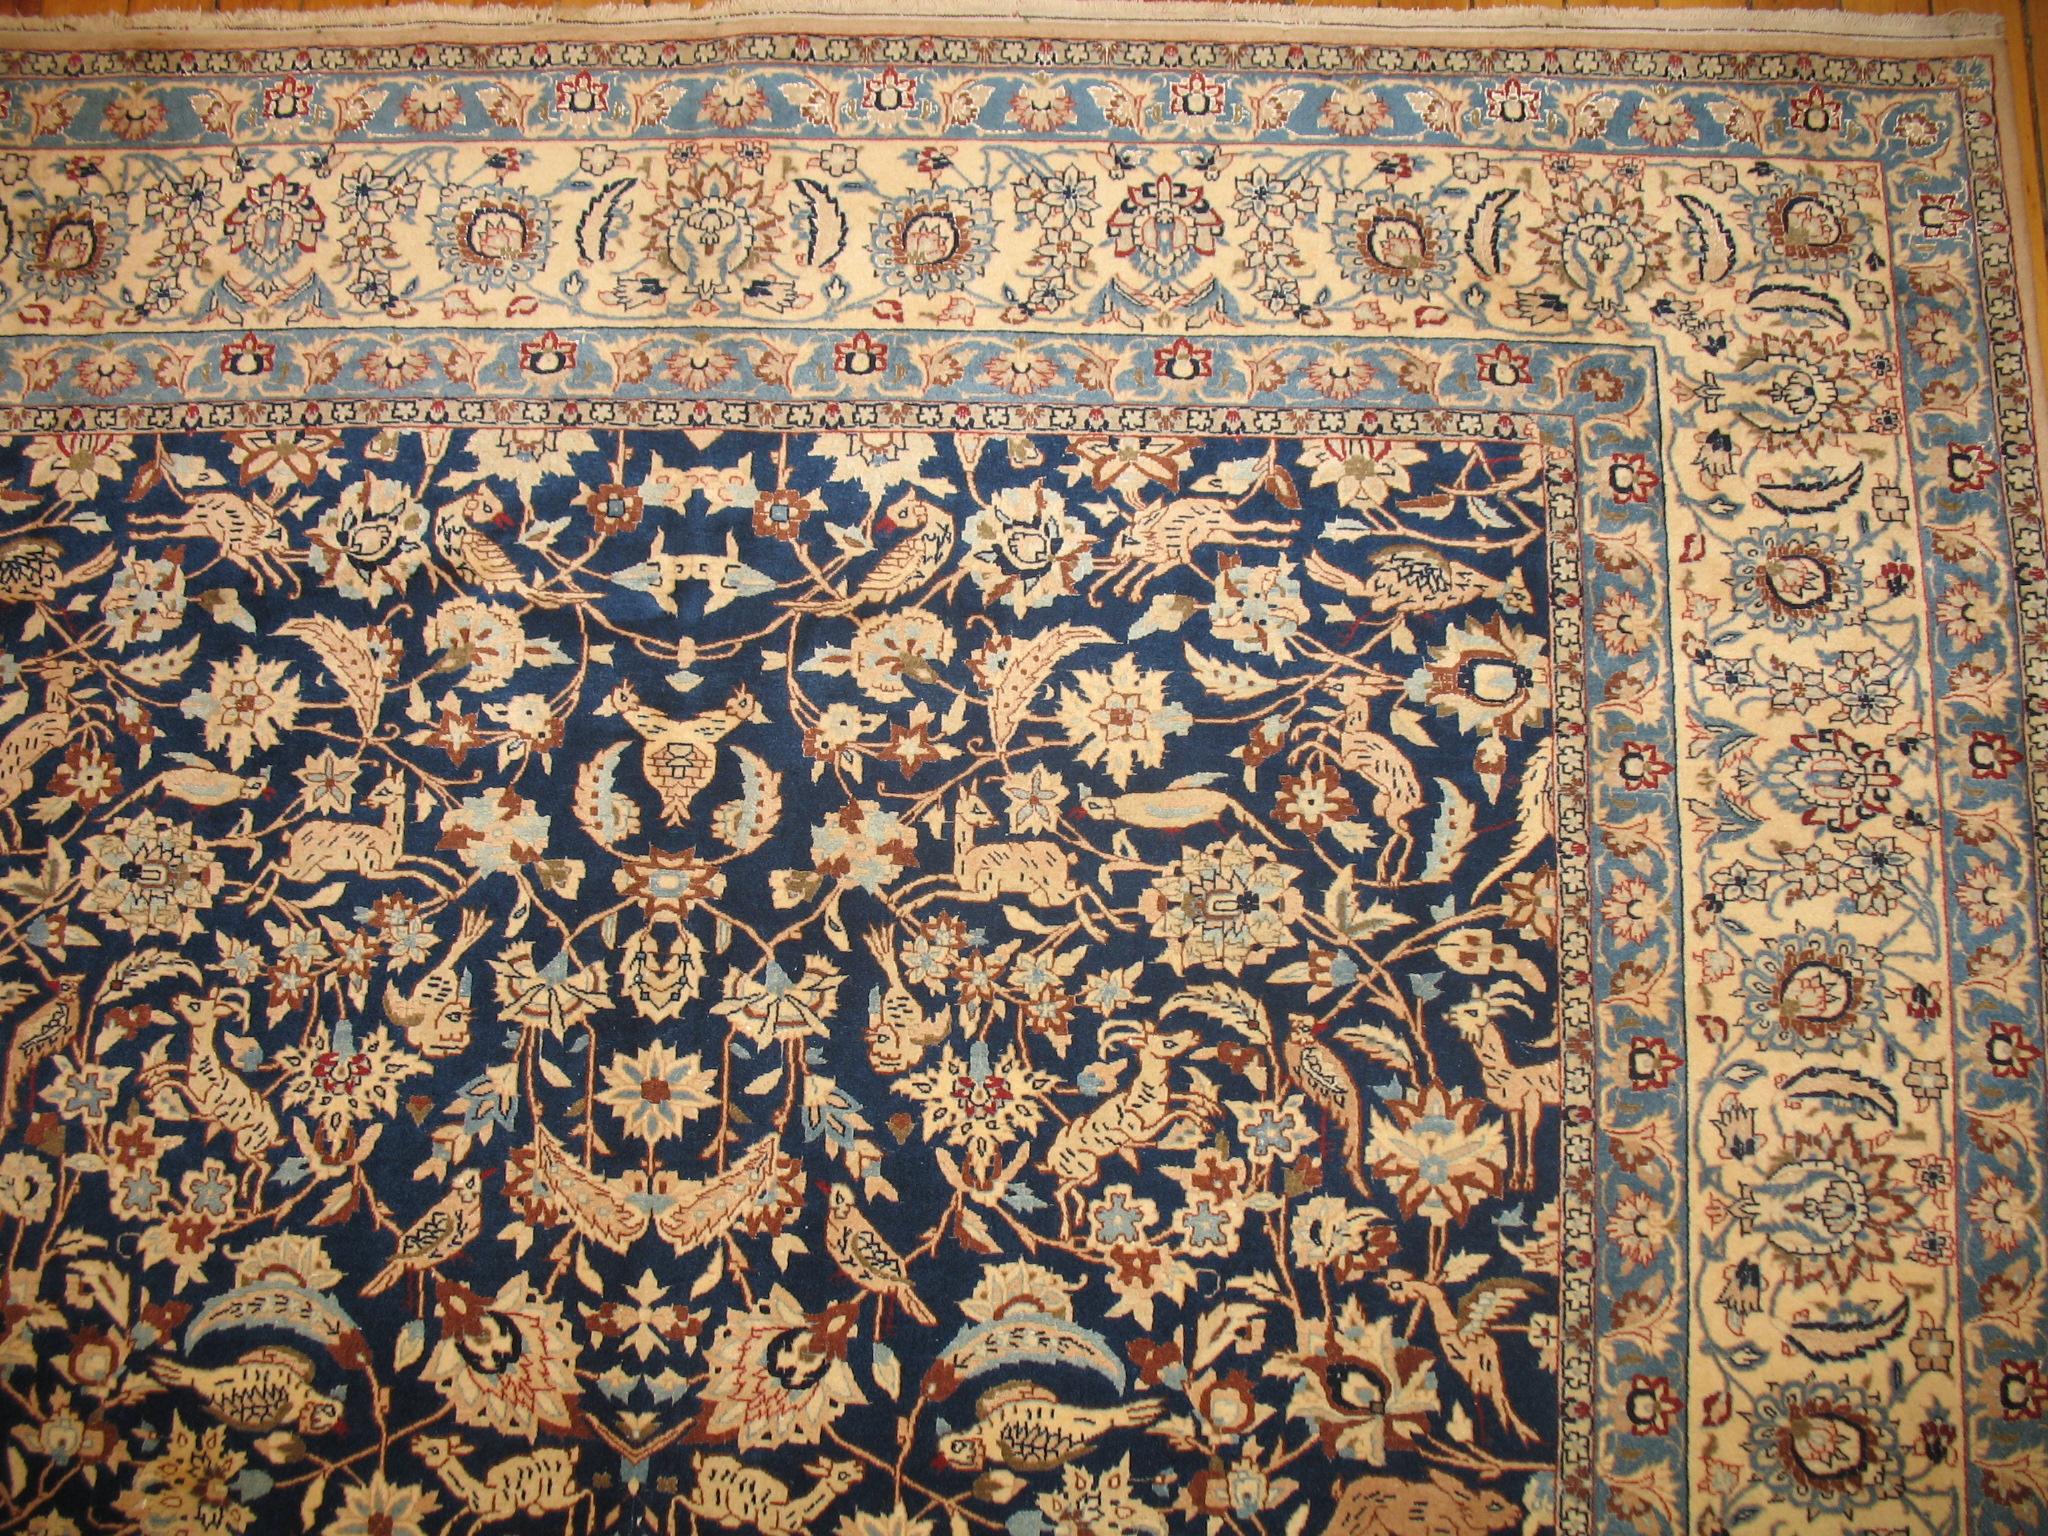 Very finely woven Pictorial Persian Nain rug featuring a pictorial design on a crispy blue colored field.

Nain is a small village located in central Iran that has relatively recently become a renowned center for carpet weaving. Production began